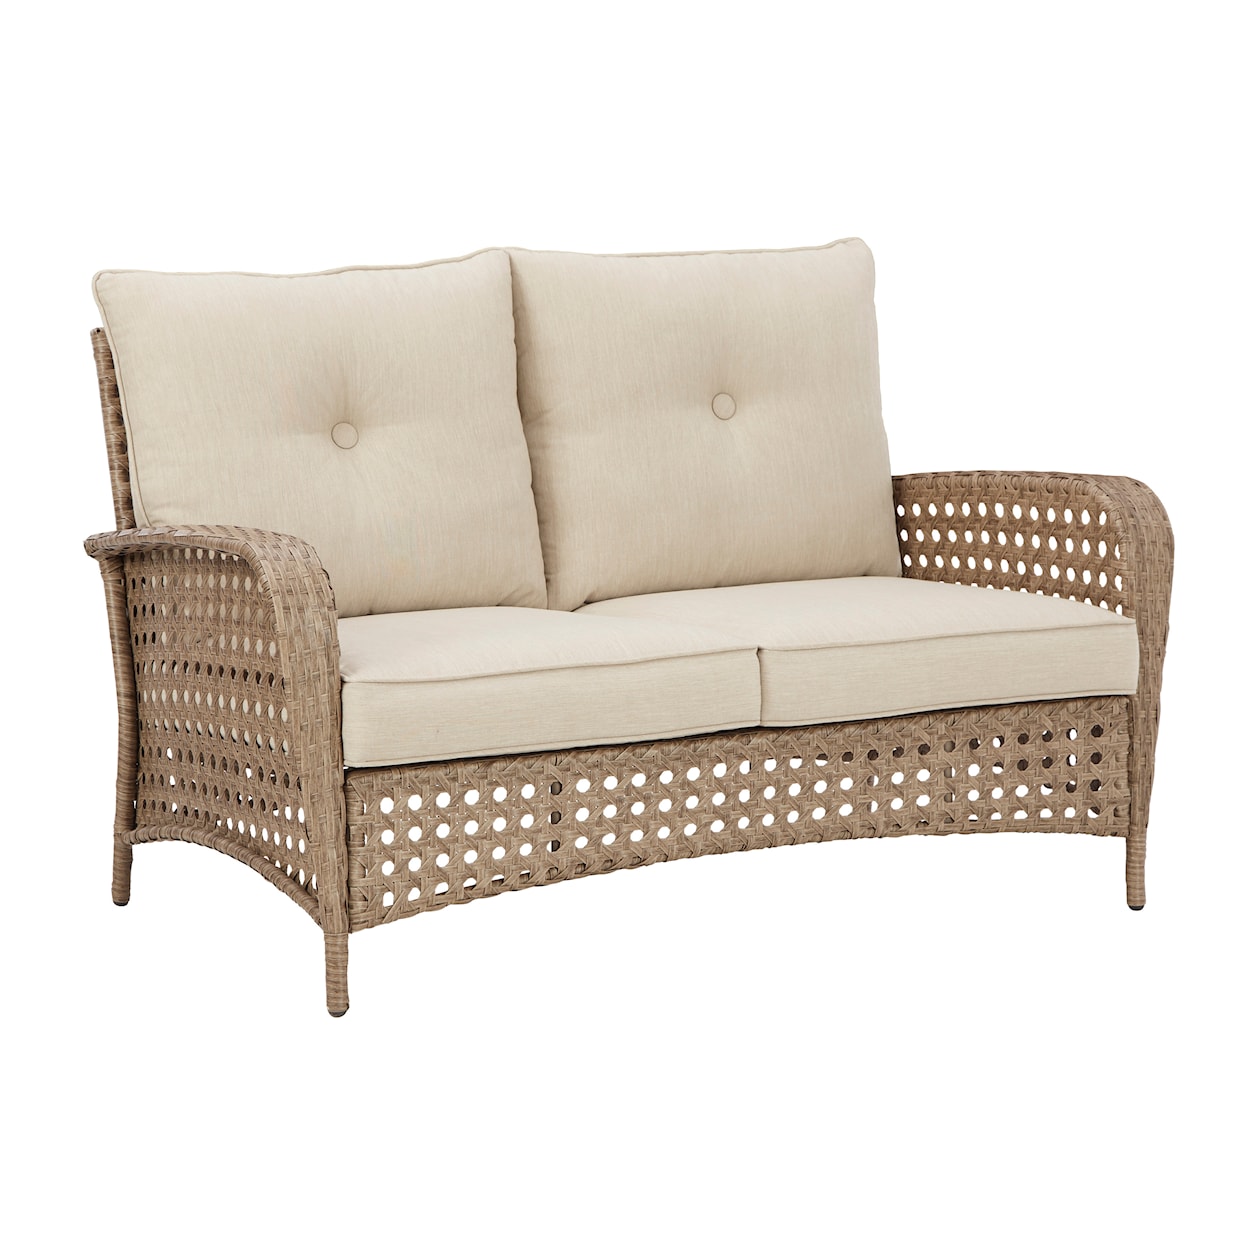 Signature Design by Ashley Braylee Outdoor Loveseats